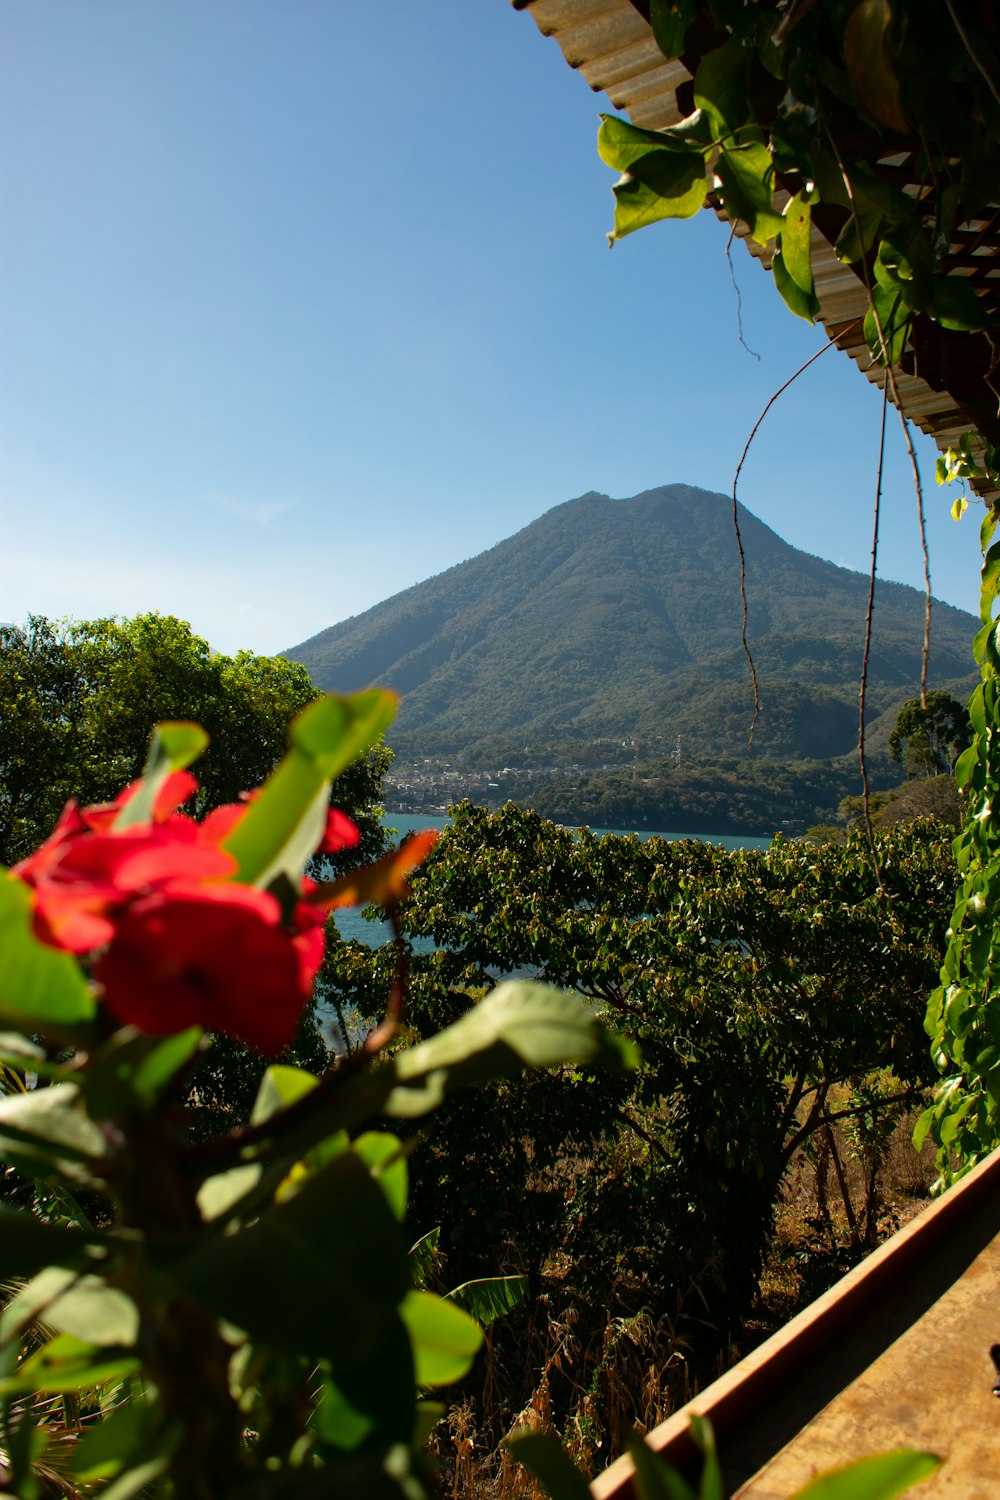 a view of a mountain with a red flower in the foreground